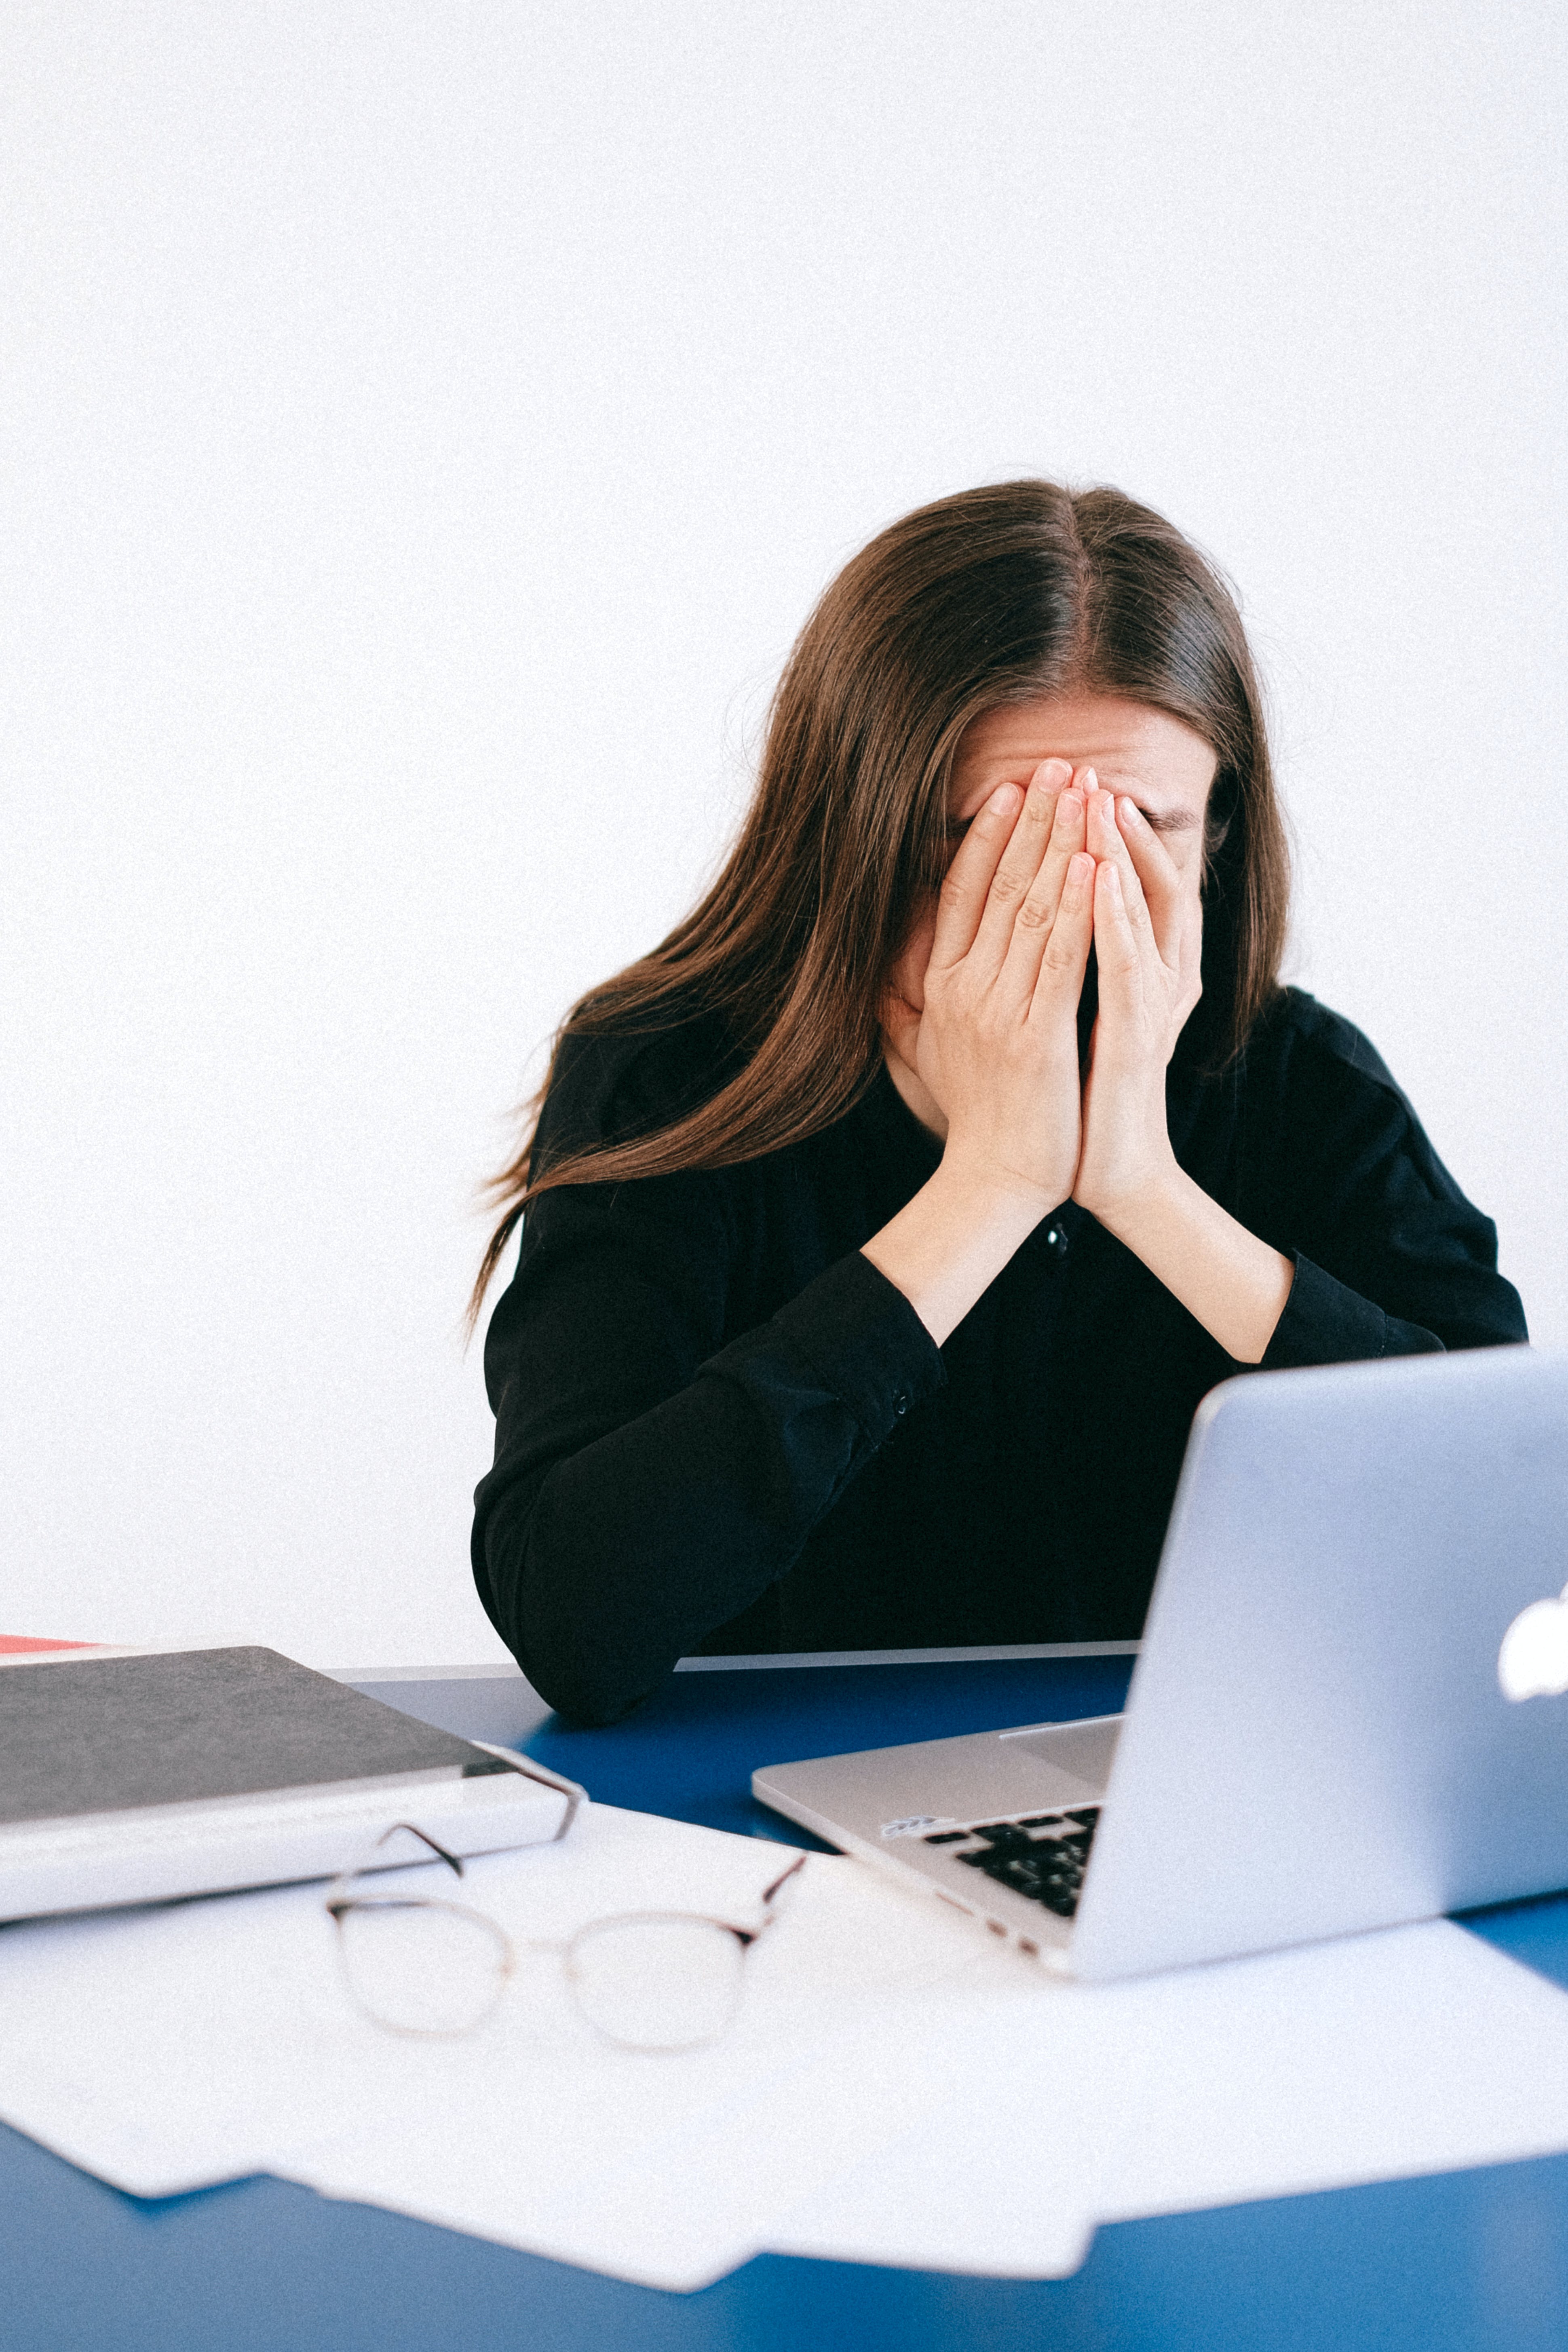 A stressed woman covering her face. | Source: Pexels